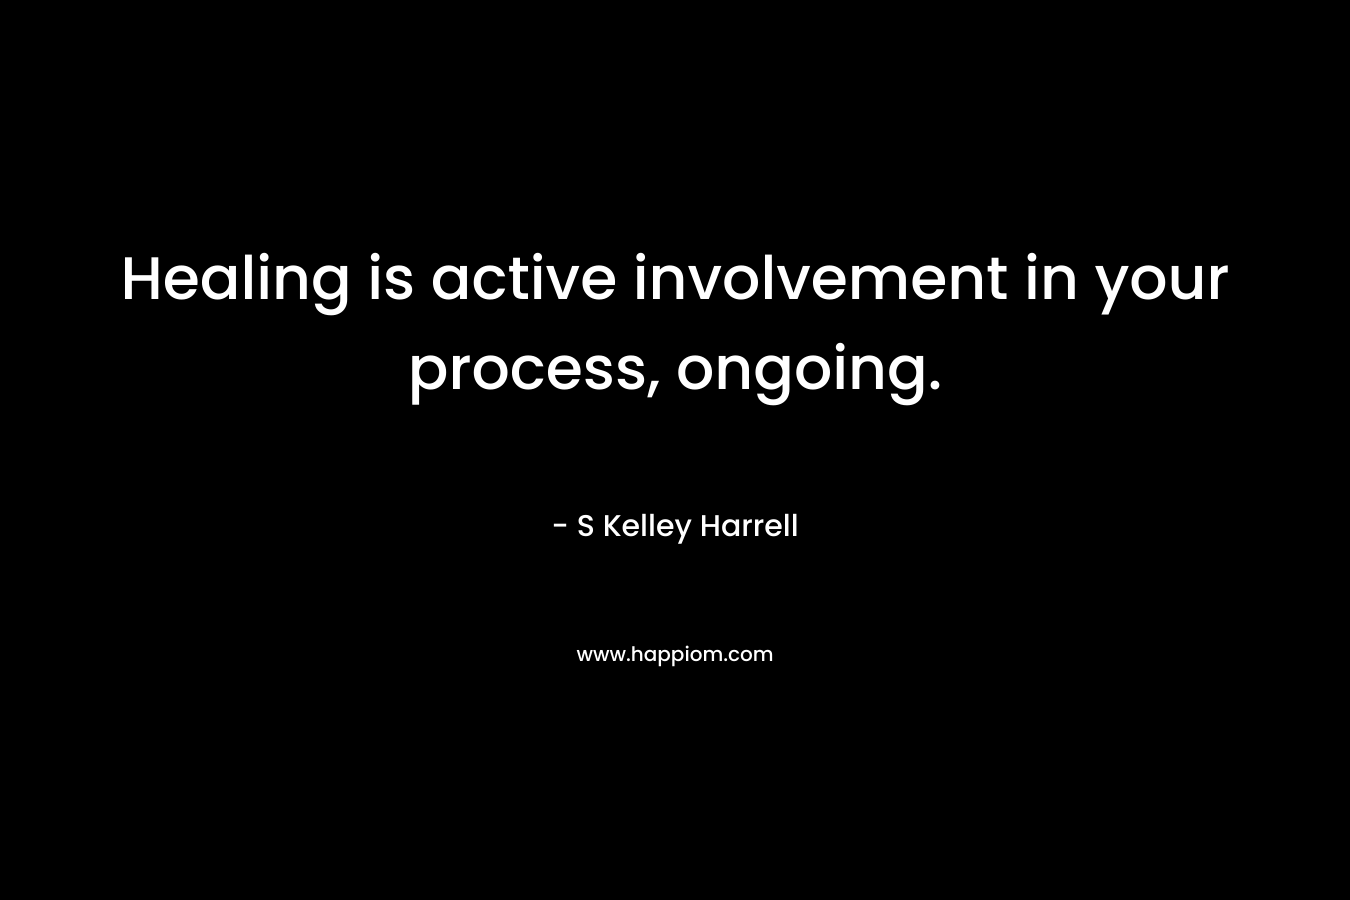 Healing is active involvement in your process, ongoing.